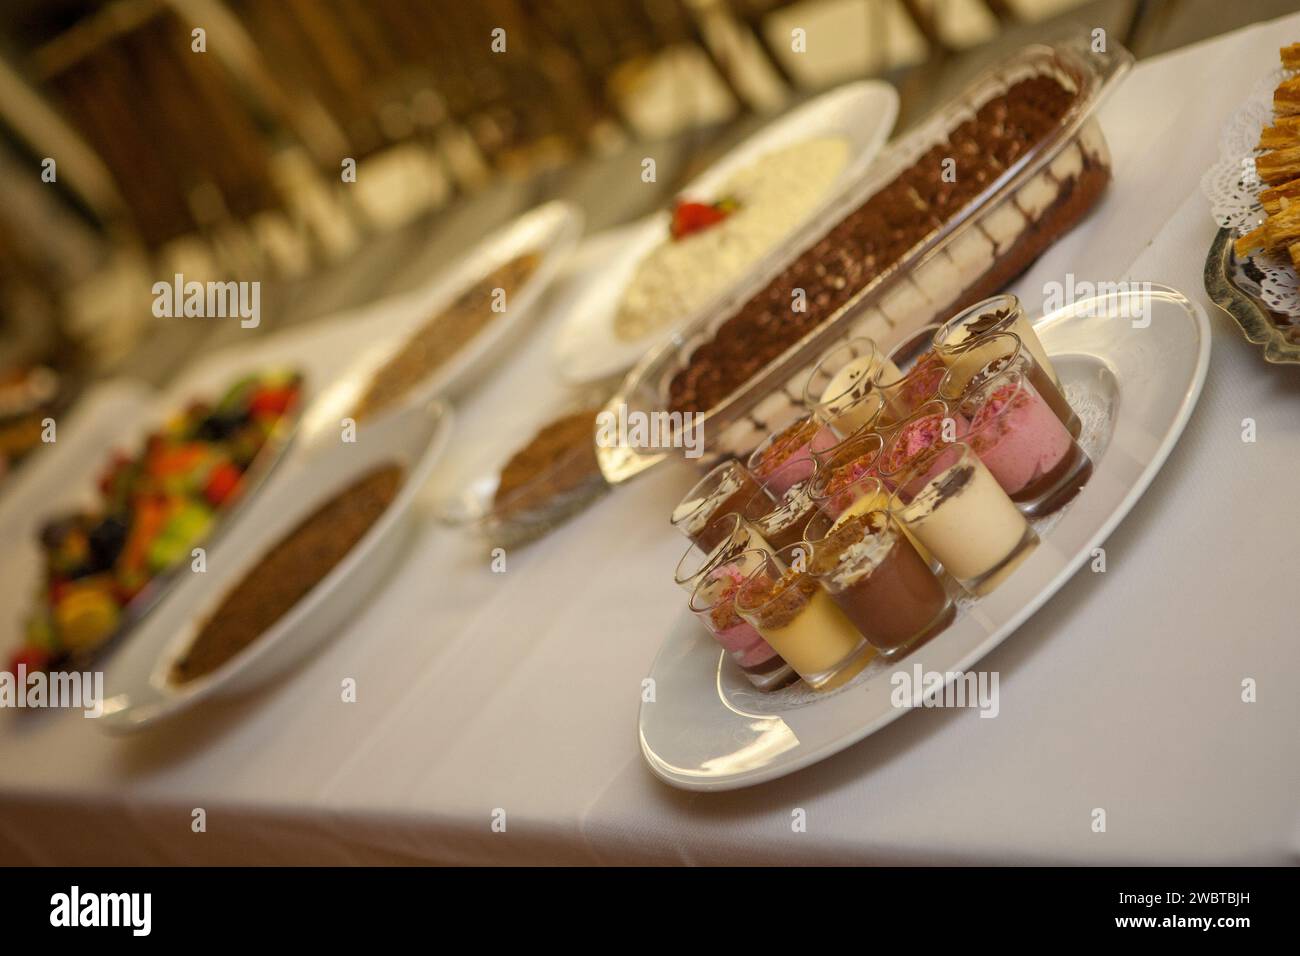 This photograph showcases a sumptuous dessert buffet, inviting guests to a sweet ending of their meal. The image is angled to focus on a variety of desserts, from layered parfaits in glass jars to rich, decadent cakes, all arranged with care on a well-laid table. The depth of field blurs the background, highlighting the nearest desserts and giving a glimpse of the array of choices available. The arrangement on silver platters adds an element of elegance to the presentation, suggesting a special occasion where desserts are not just treats, but part of the celebration. Sweet Finale: A Dessert Bu Stock Photo